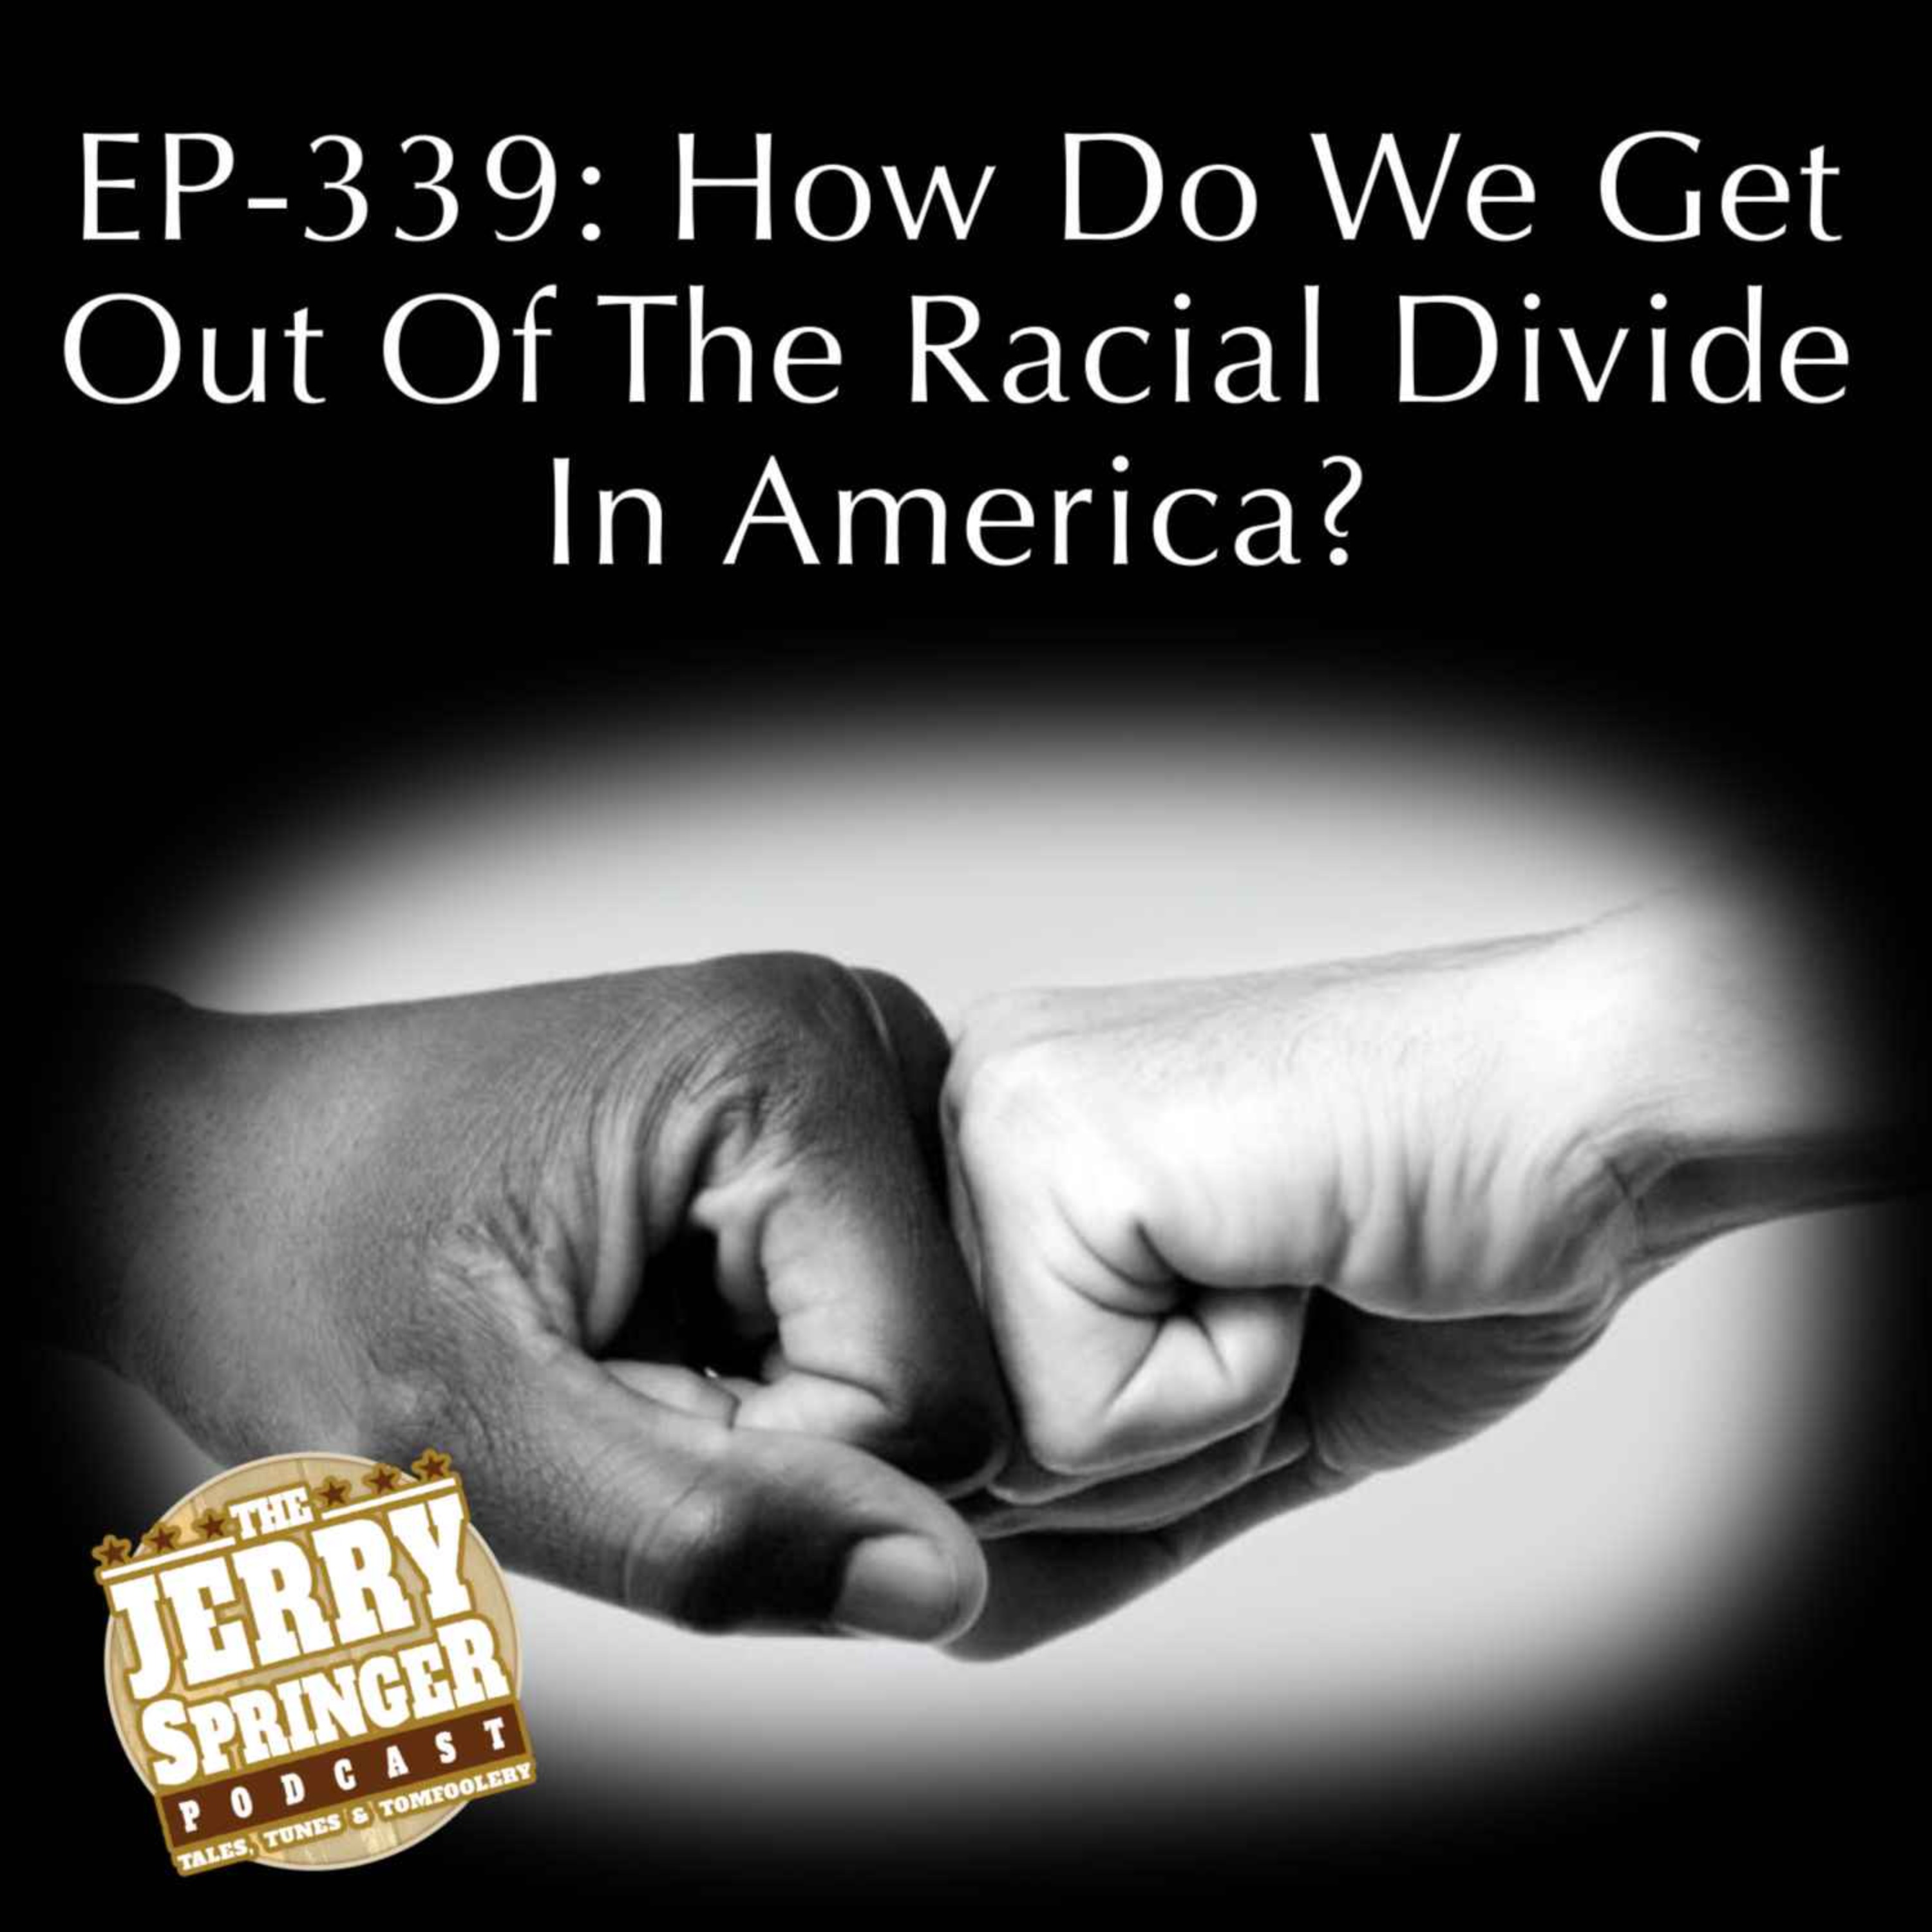 How Do We Get Out Of the Racial Divide In America? EP-339